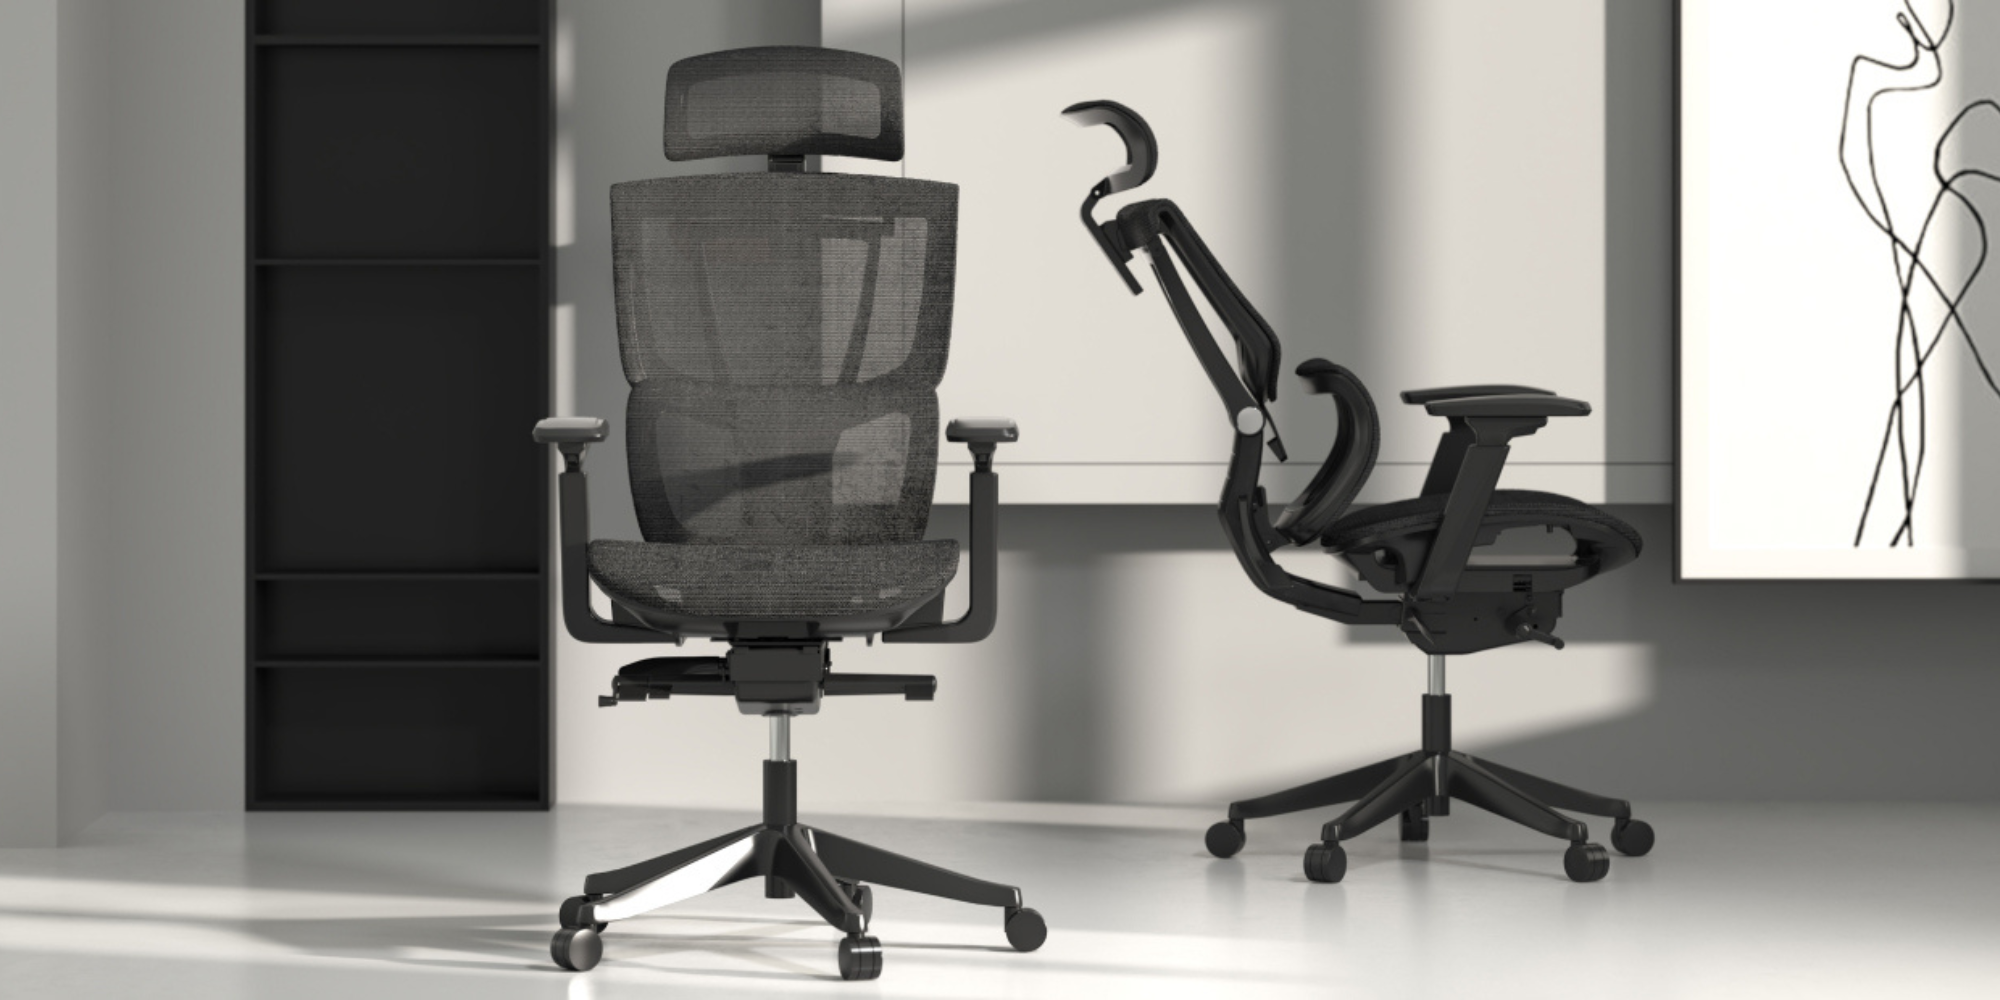 Two FlexiSpot chairs are in a black and white room.